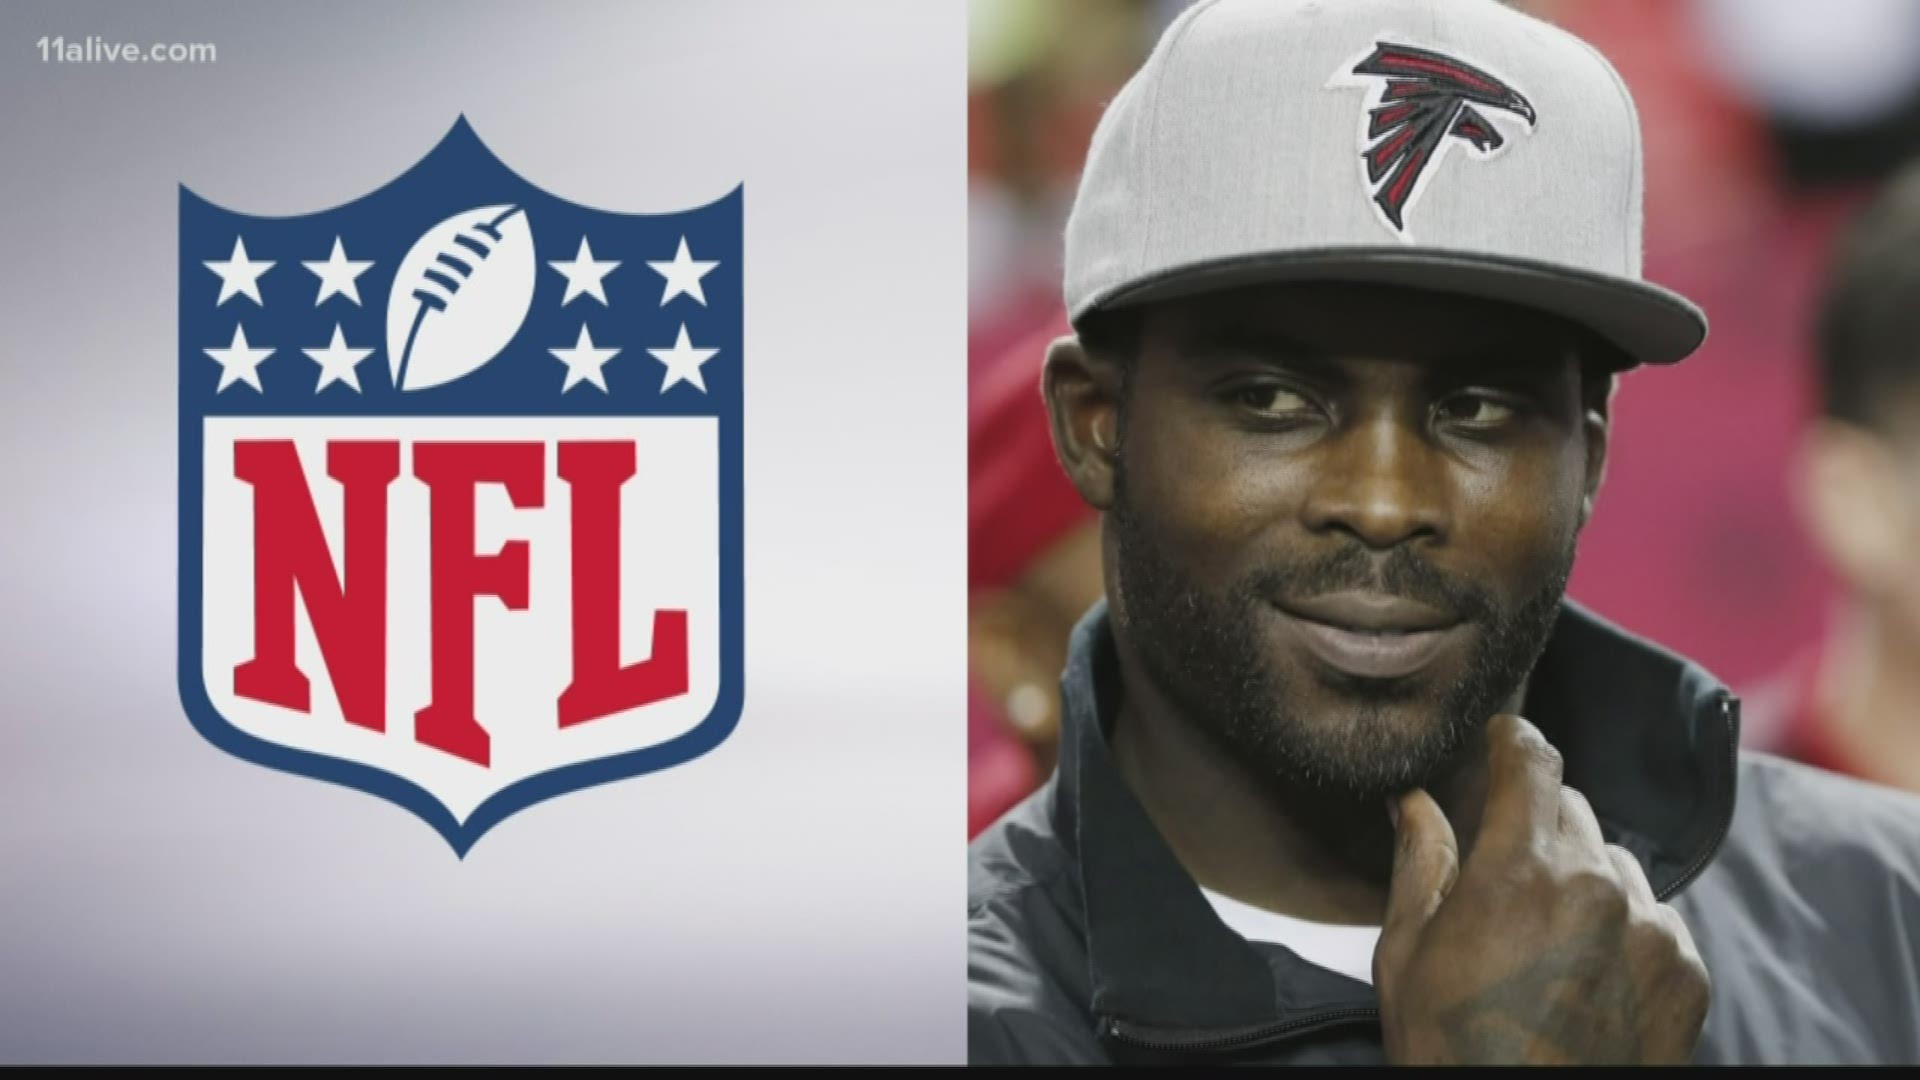 The NFL has announced that former star quarterback Michael Vick will serve as a captain during the 2020 Pro Bowl. But the news doesn't come without controversy.